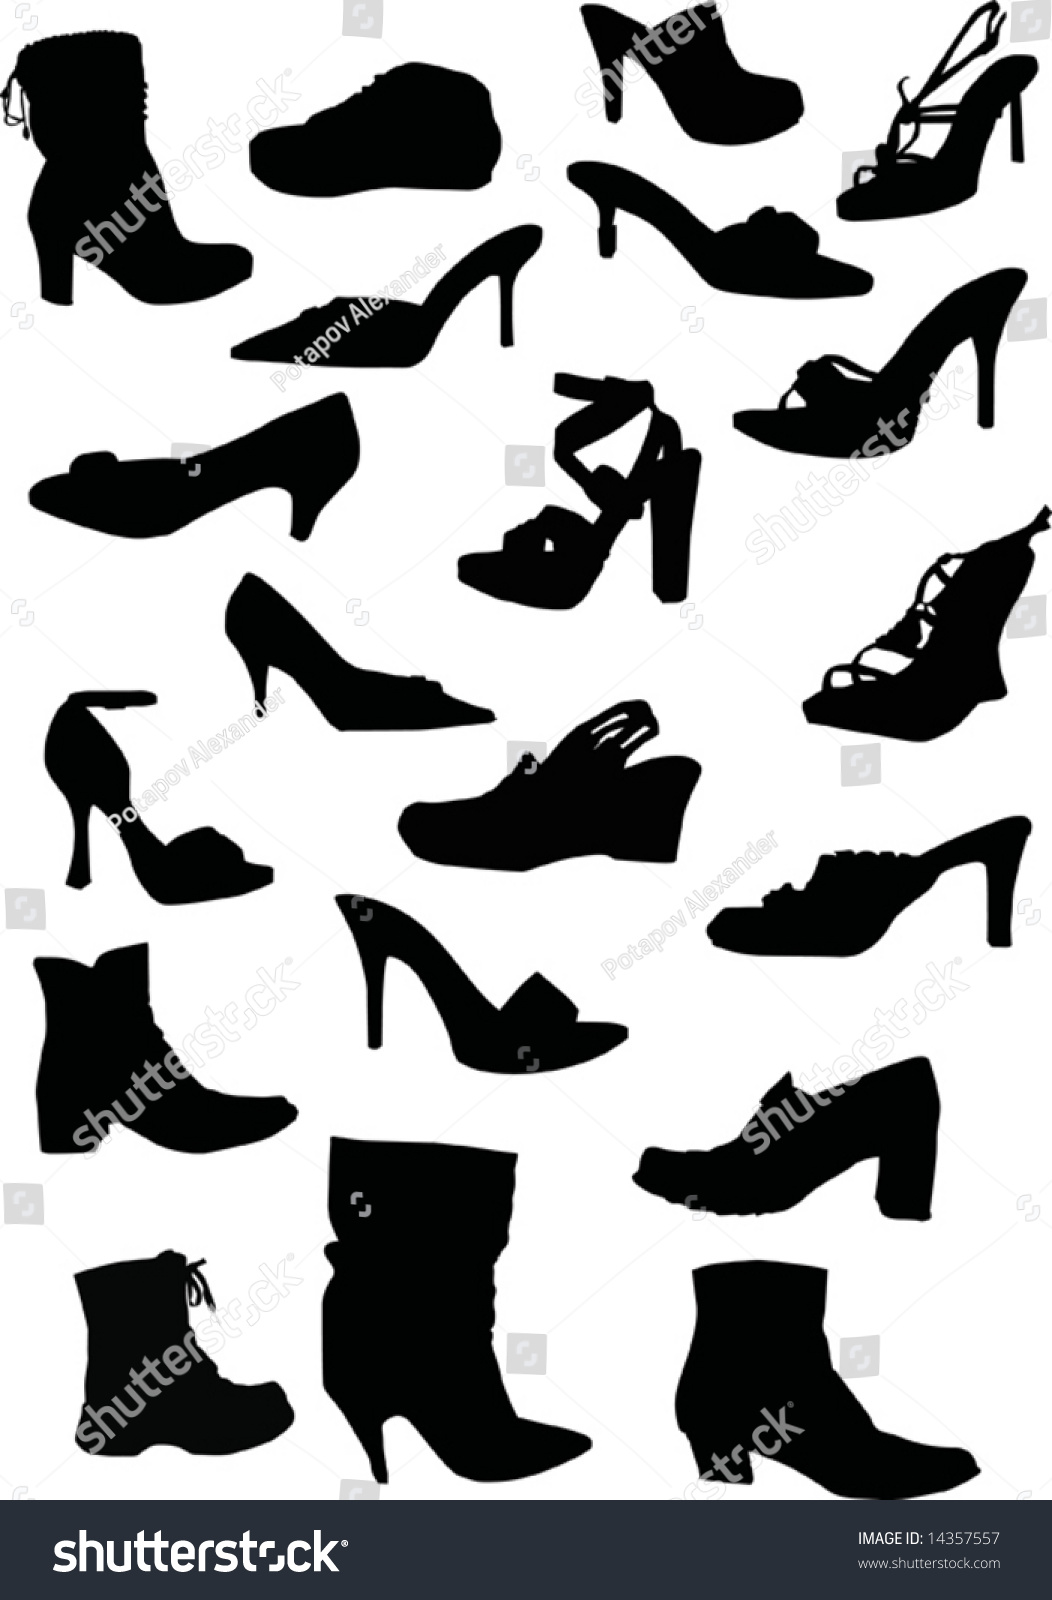 Collection Of Foot-Wears Silhouettes Isolated On White Background Stock ...